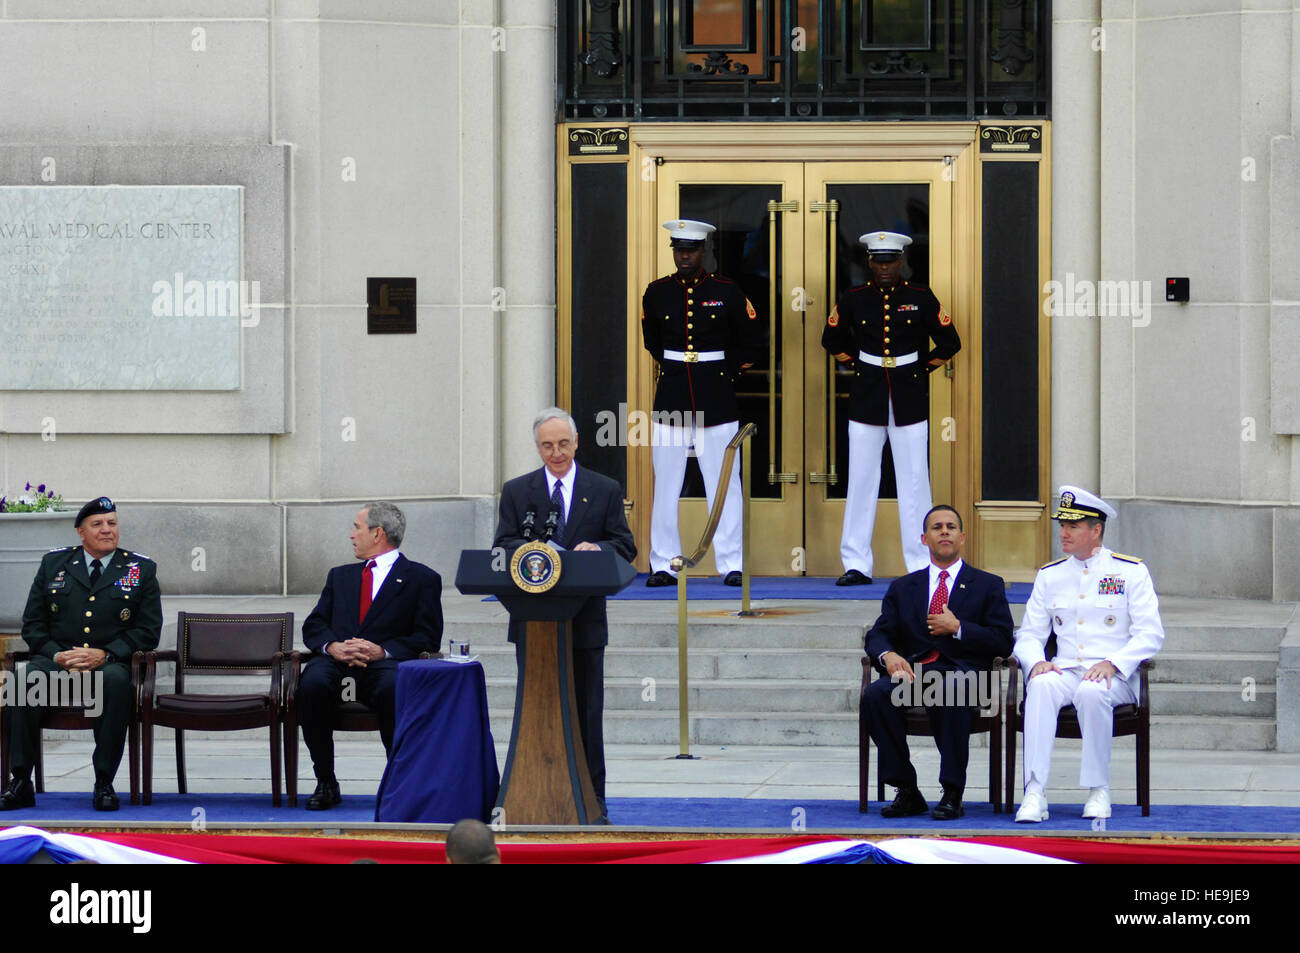 President George W. Bush and Deputy Secretary of Defense Gordon England preside over the Walter Reed National Military Medical Center ground breaking ceremony at Bethesda Naval Hospital in Md., Thursday, July 3, 2008.     Tech. Sgt. Suzanne M. Day () Stock Photo